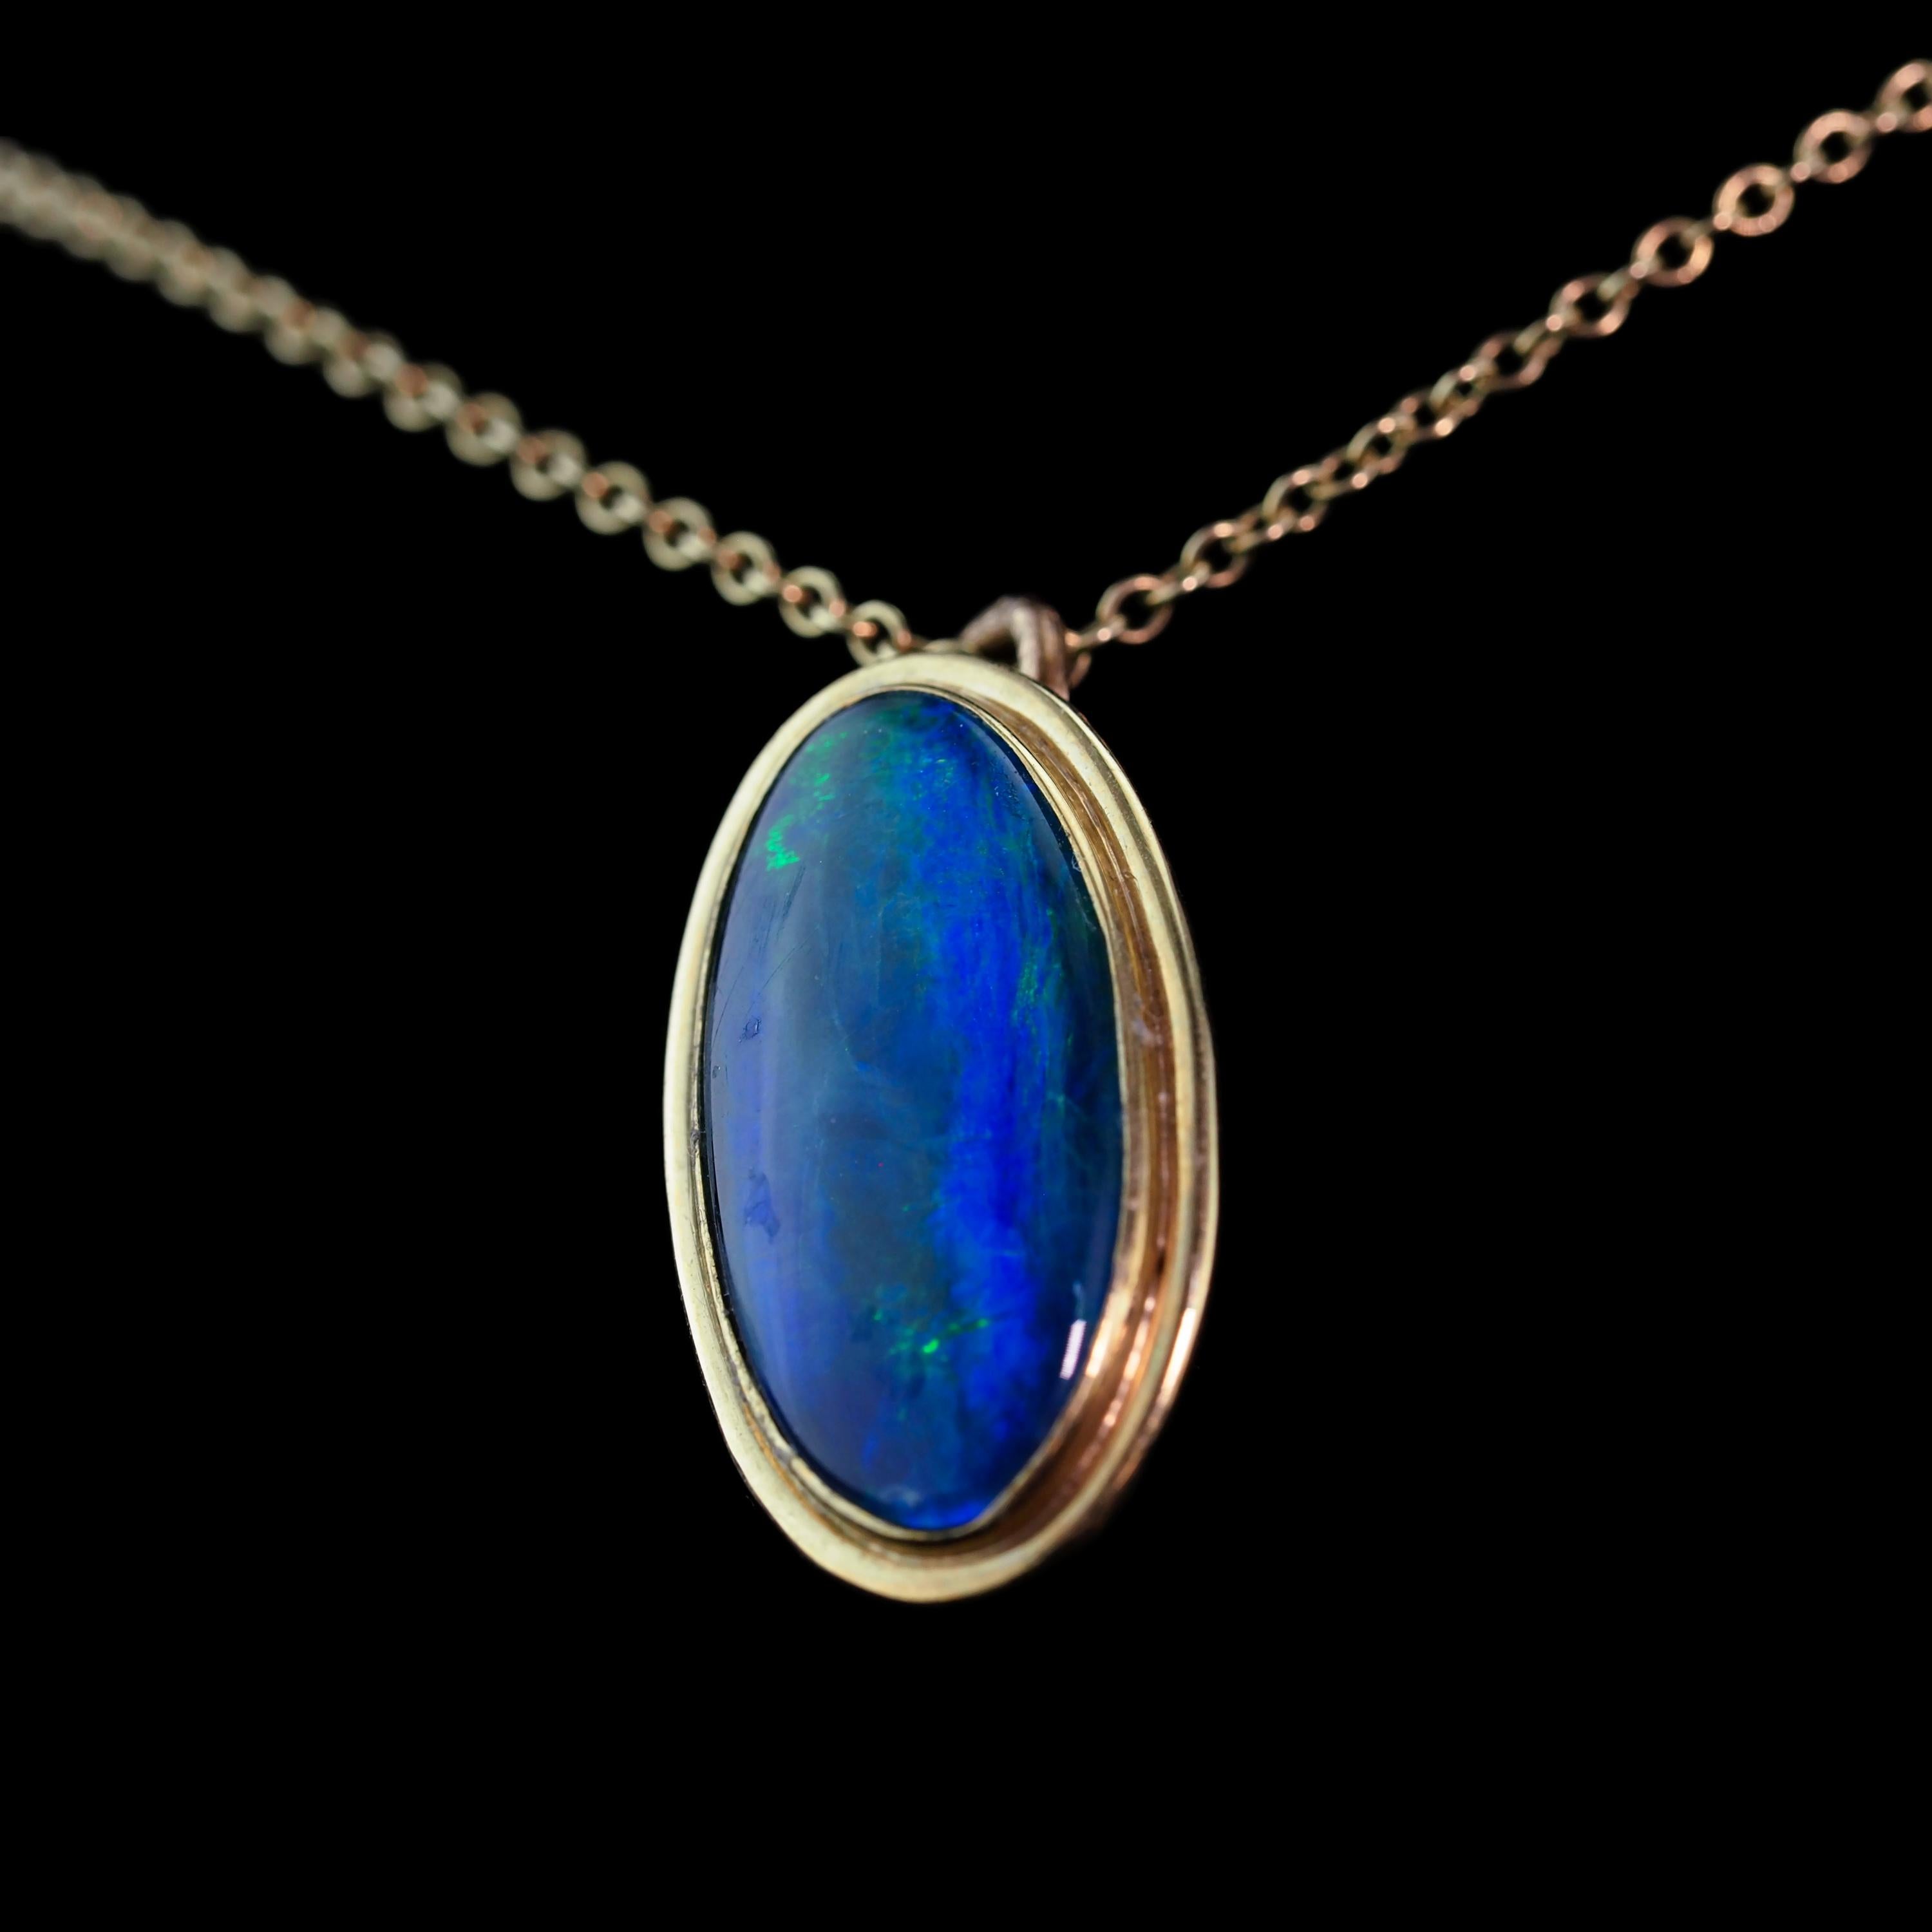 9K Gold Blue/Green Ammolite Pendant & Chain Necklace For Sale 5